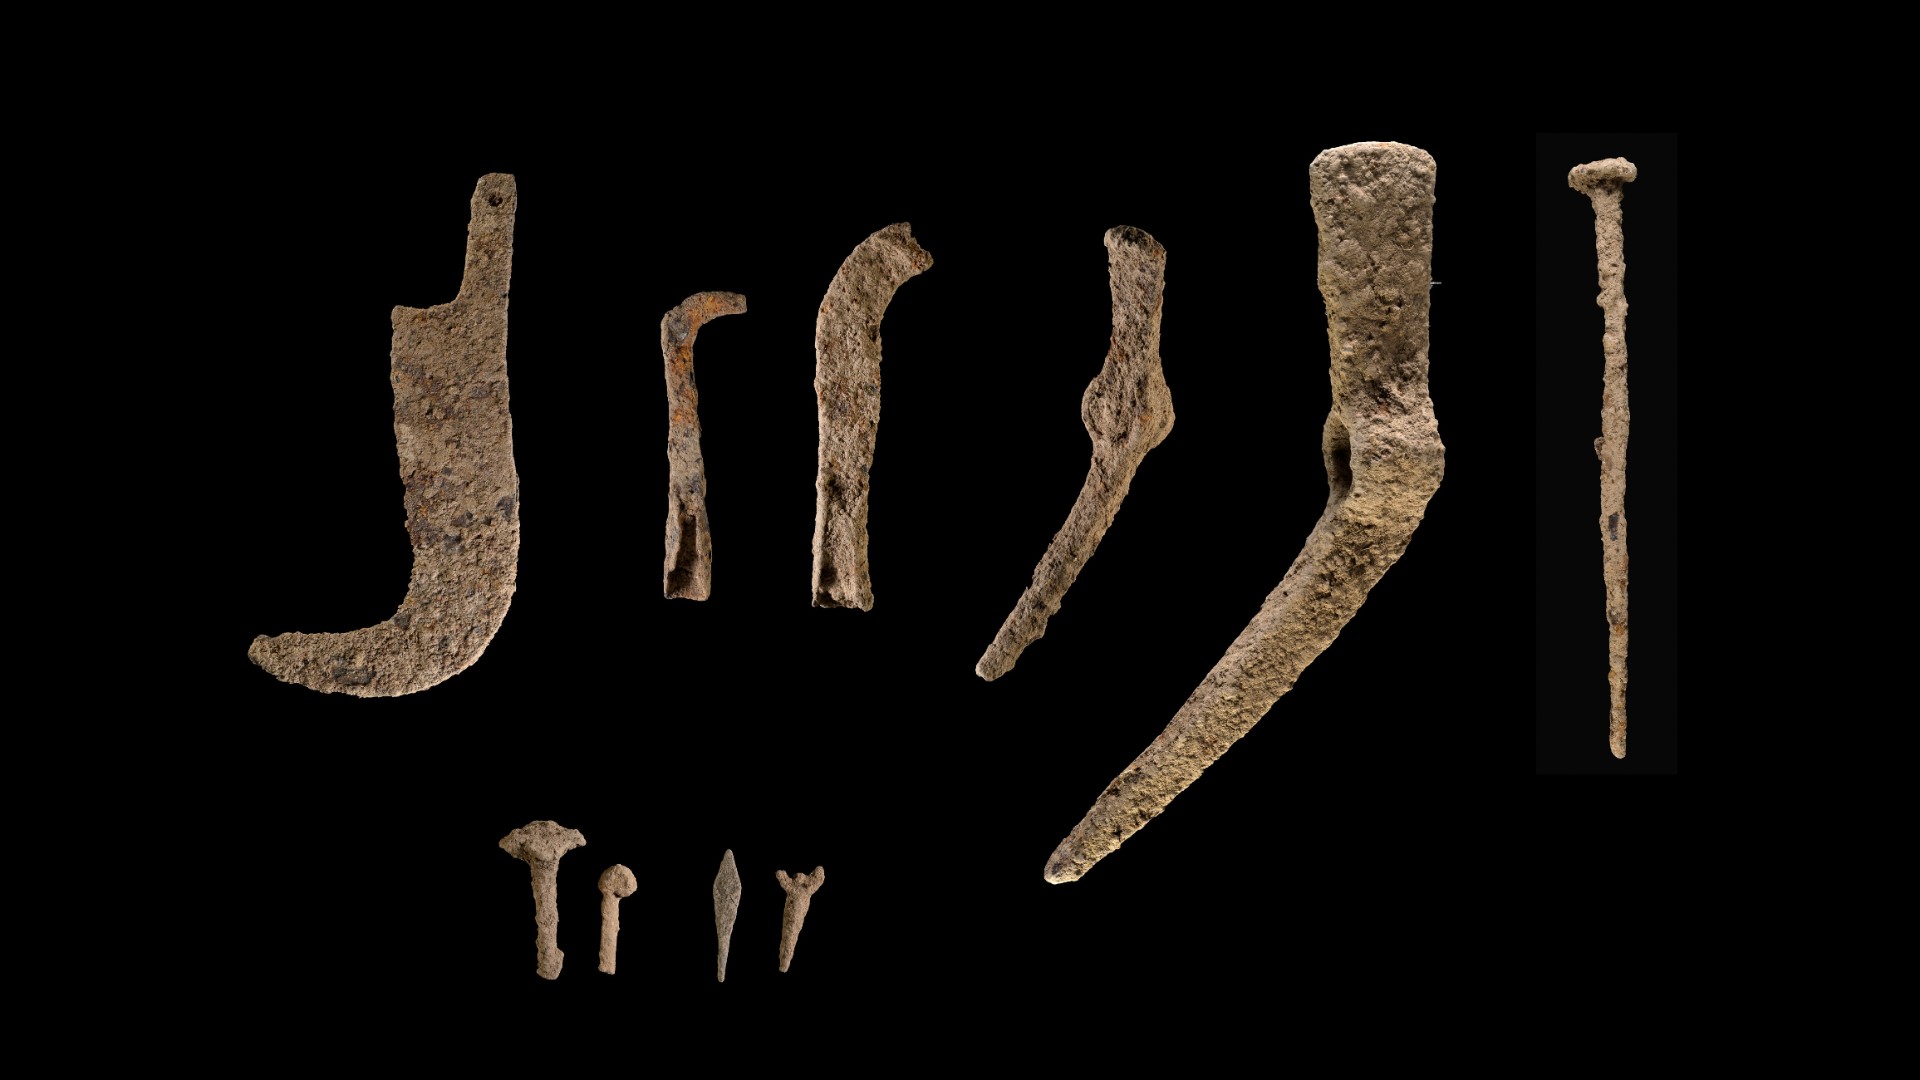 This image shows a selection of agricultural implements made from iron (such as picks and scythes) that were found in the ruins of a farmstead in northern Israel.